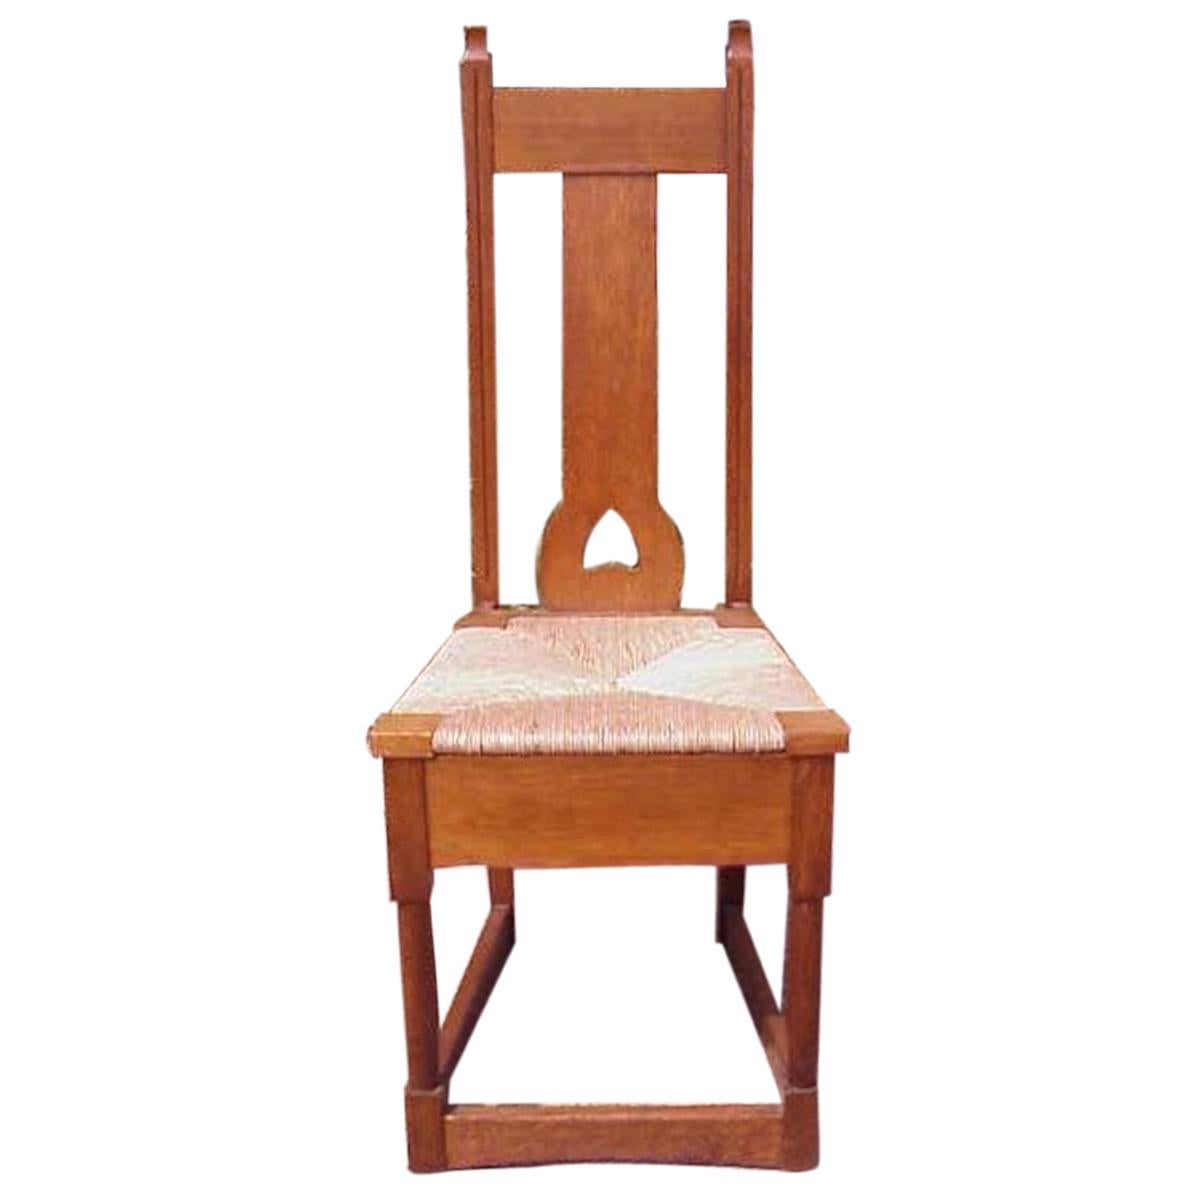 Shapland & Petter, Baillie Scott Style of, Arts & Crafts Oak Rush Seated Chair